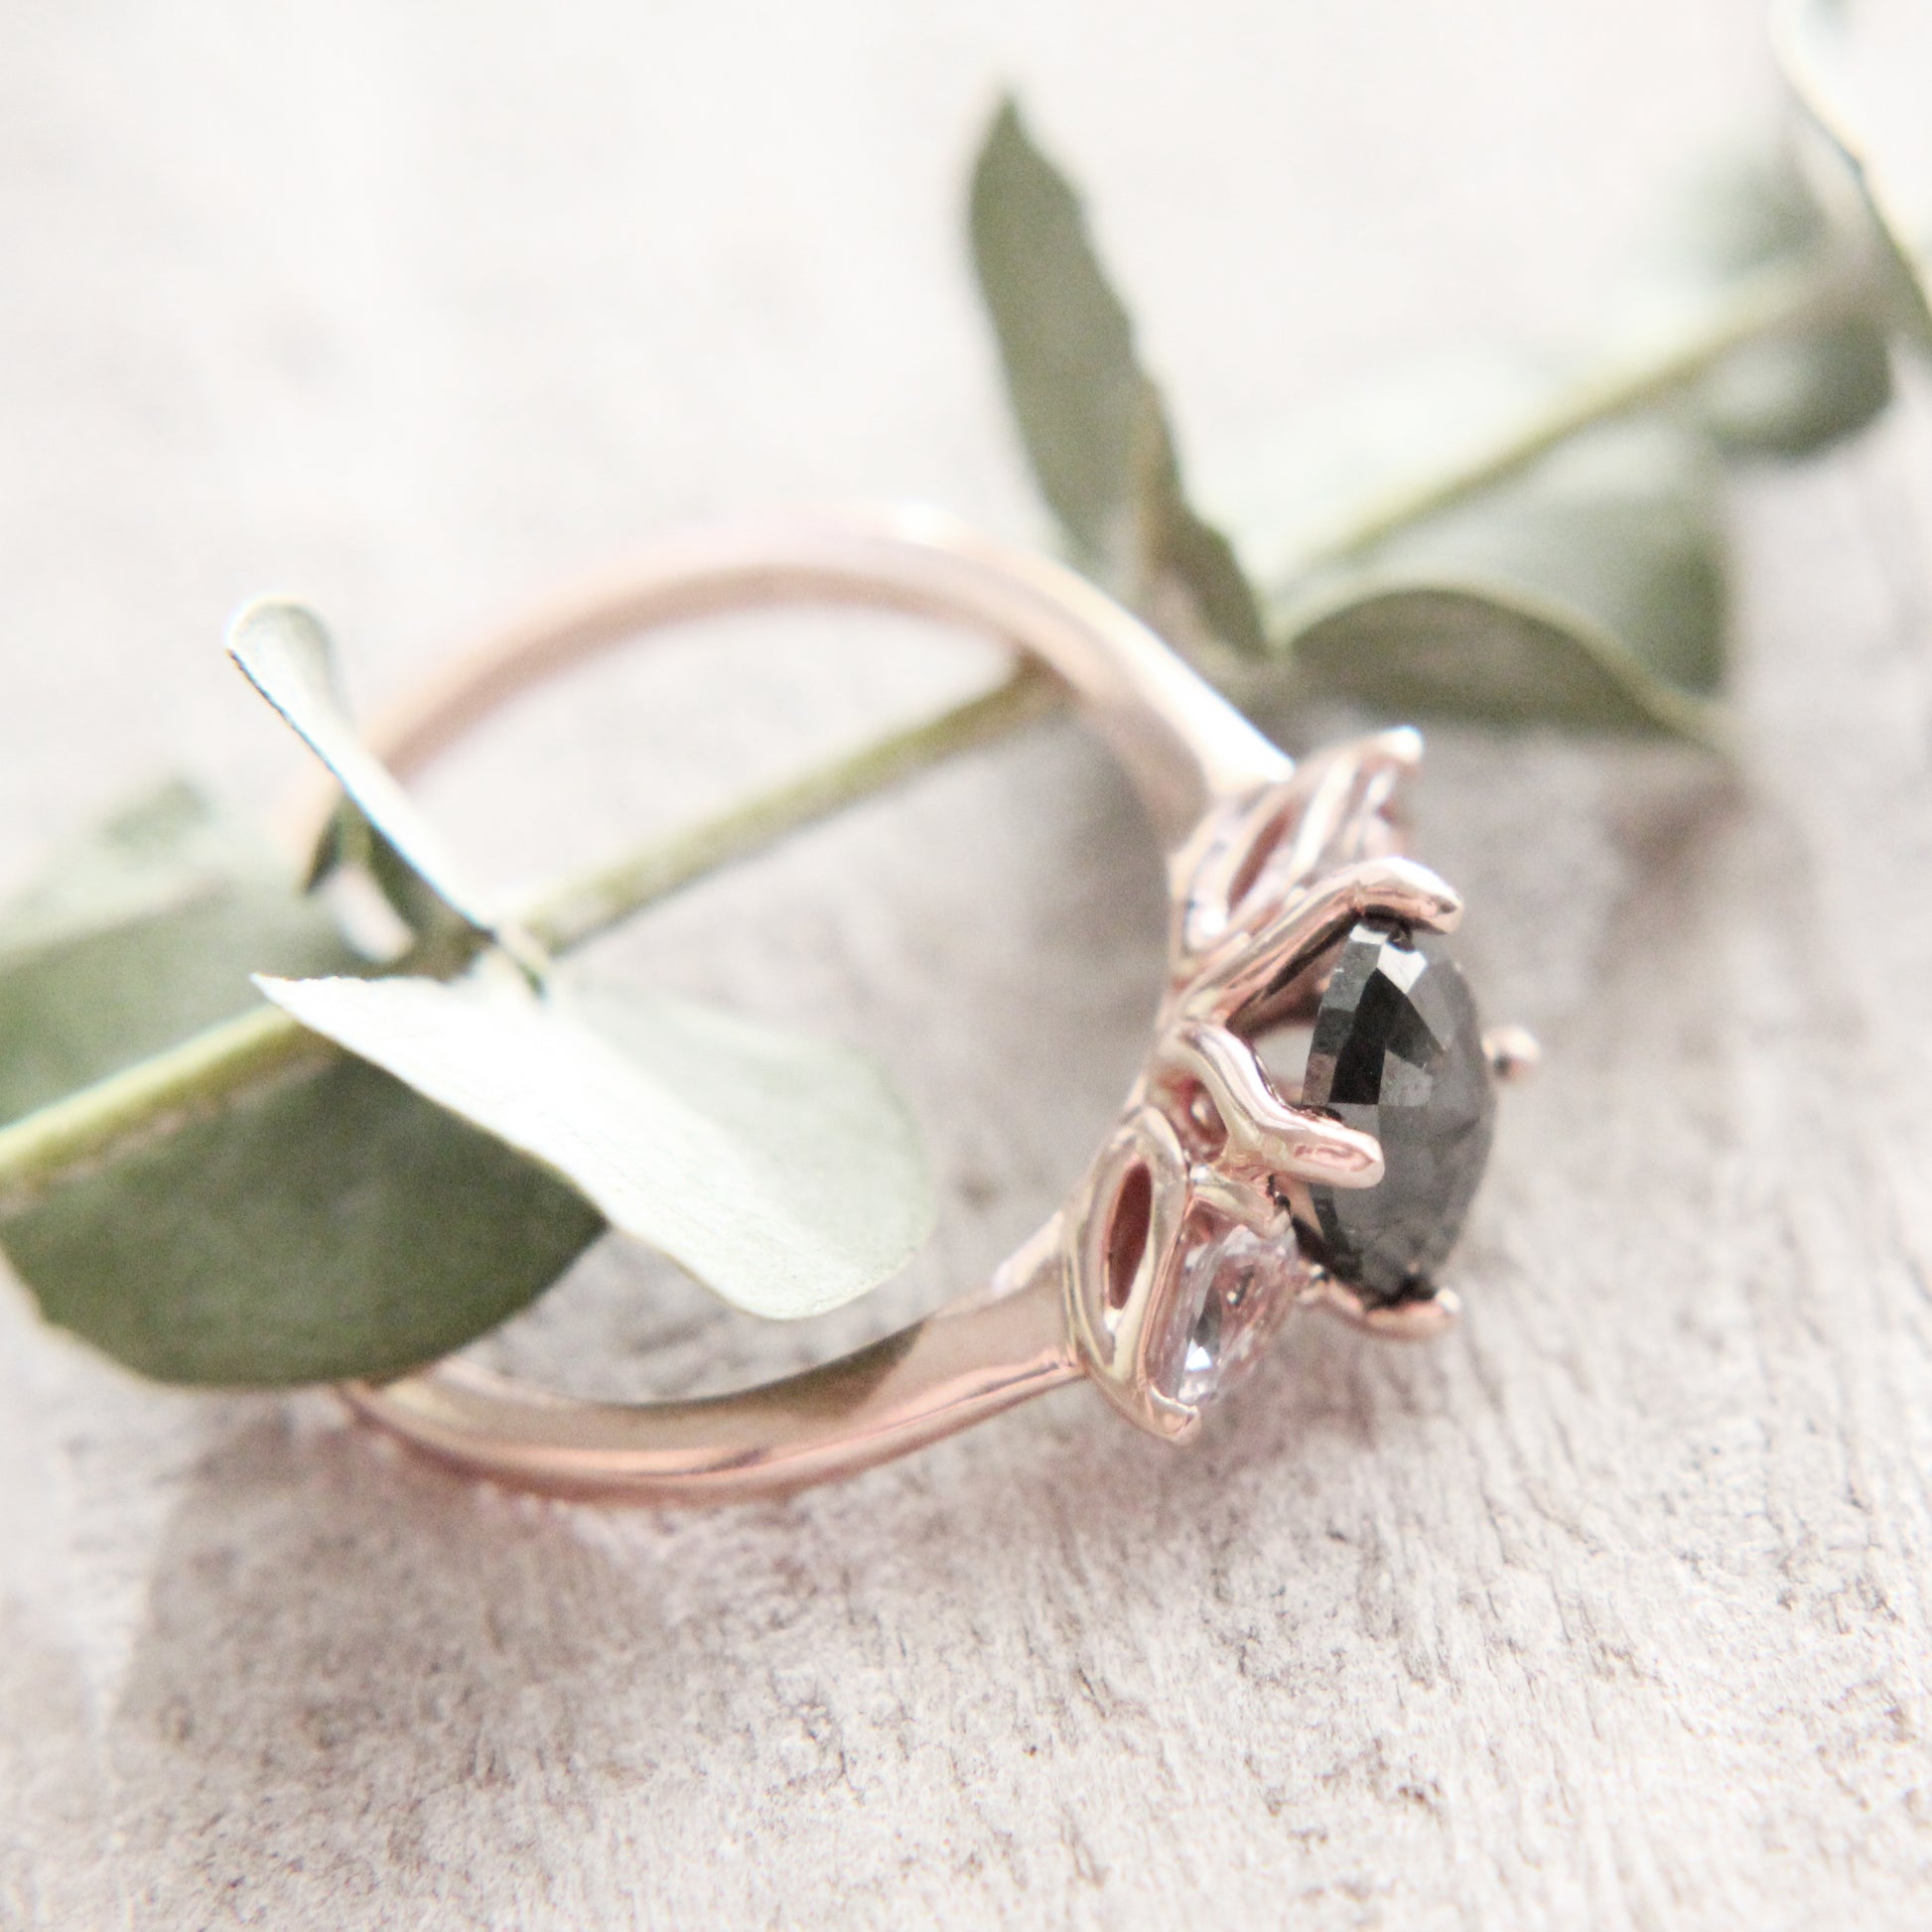 Oleander setting - Midwinter Co. Alternative Bridal Rings and Modern Fine Jewelry